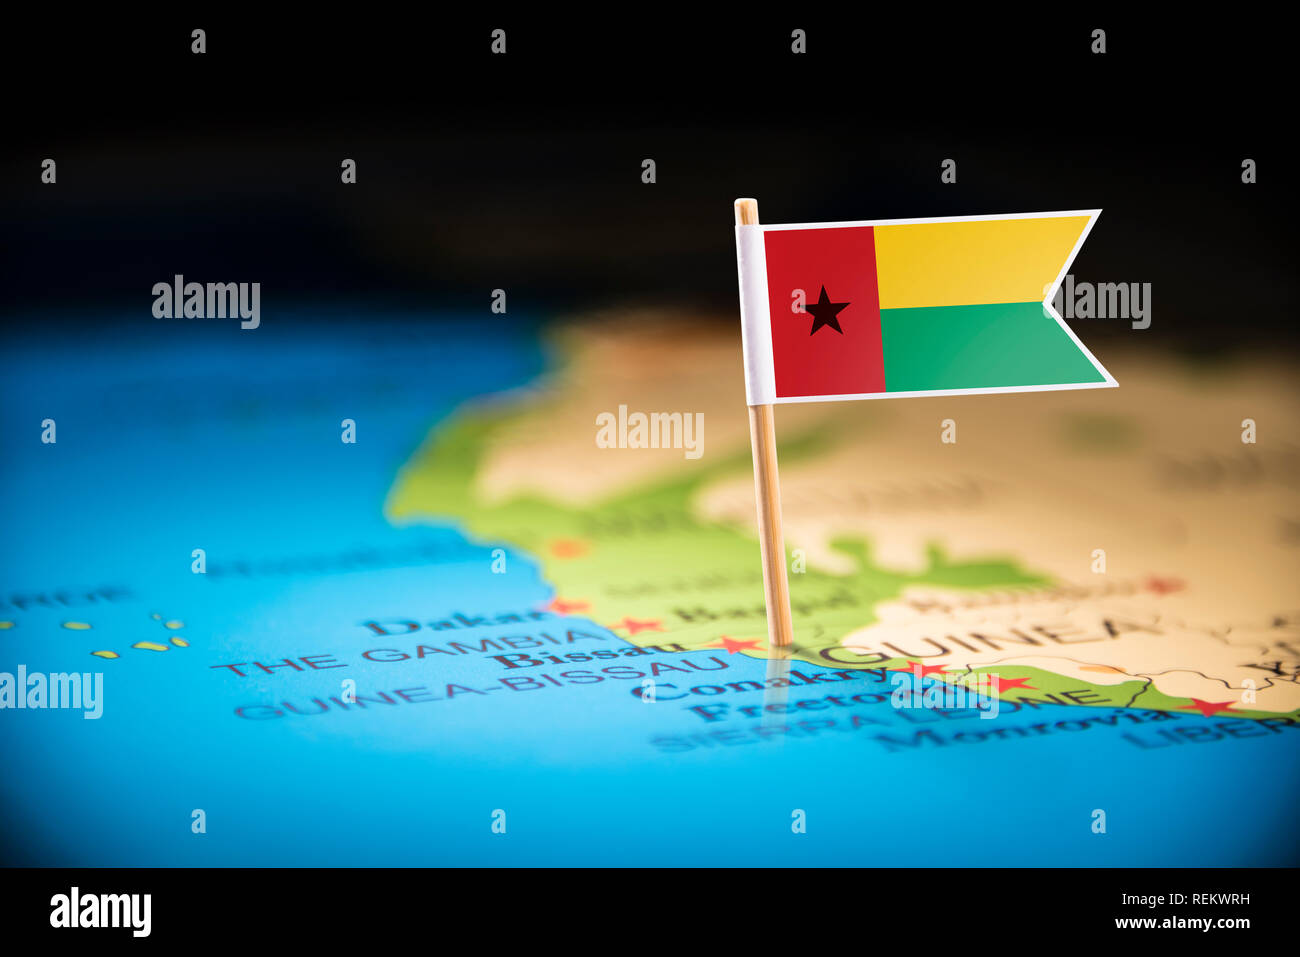 Guinea Bissau marked with a flag on the map Stock Photo